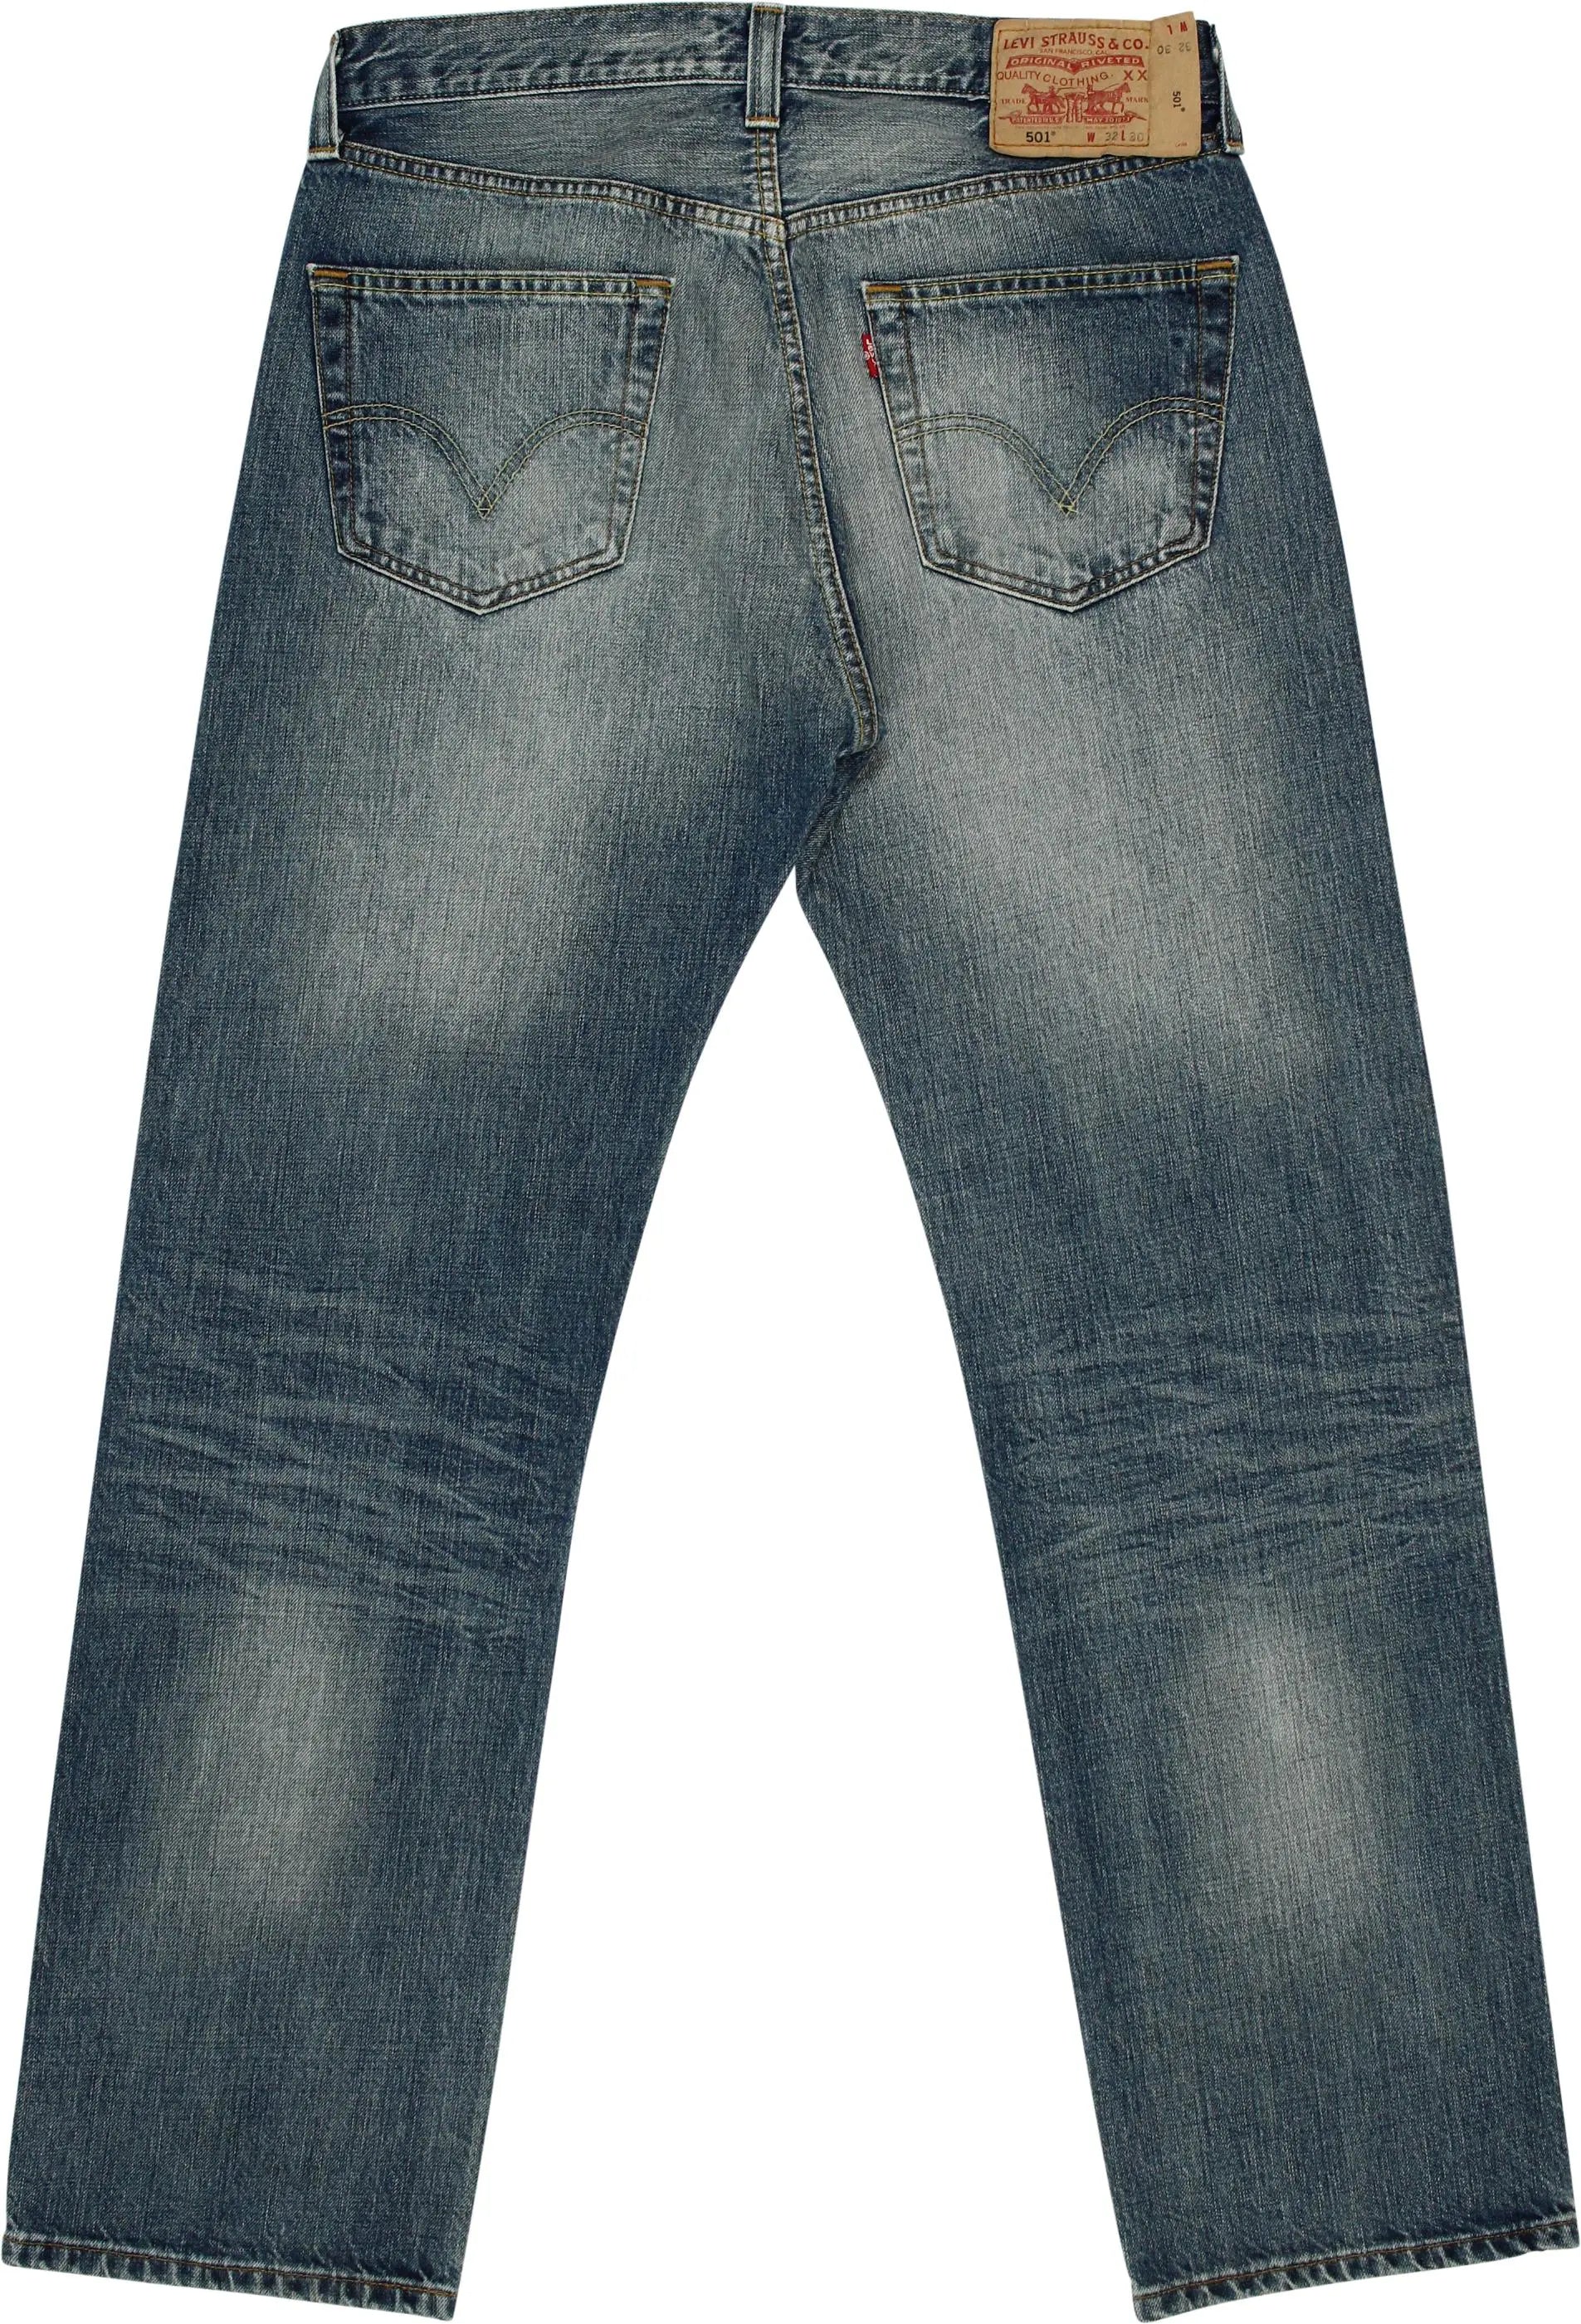 Levi's - Levi's 501 Ripped Jeans- ThriftTale.com - Vintage and second handclothing